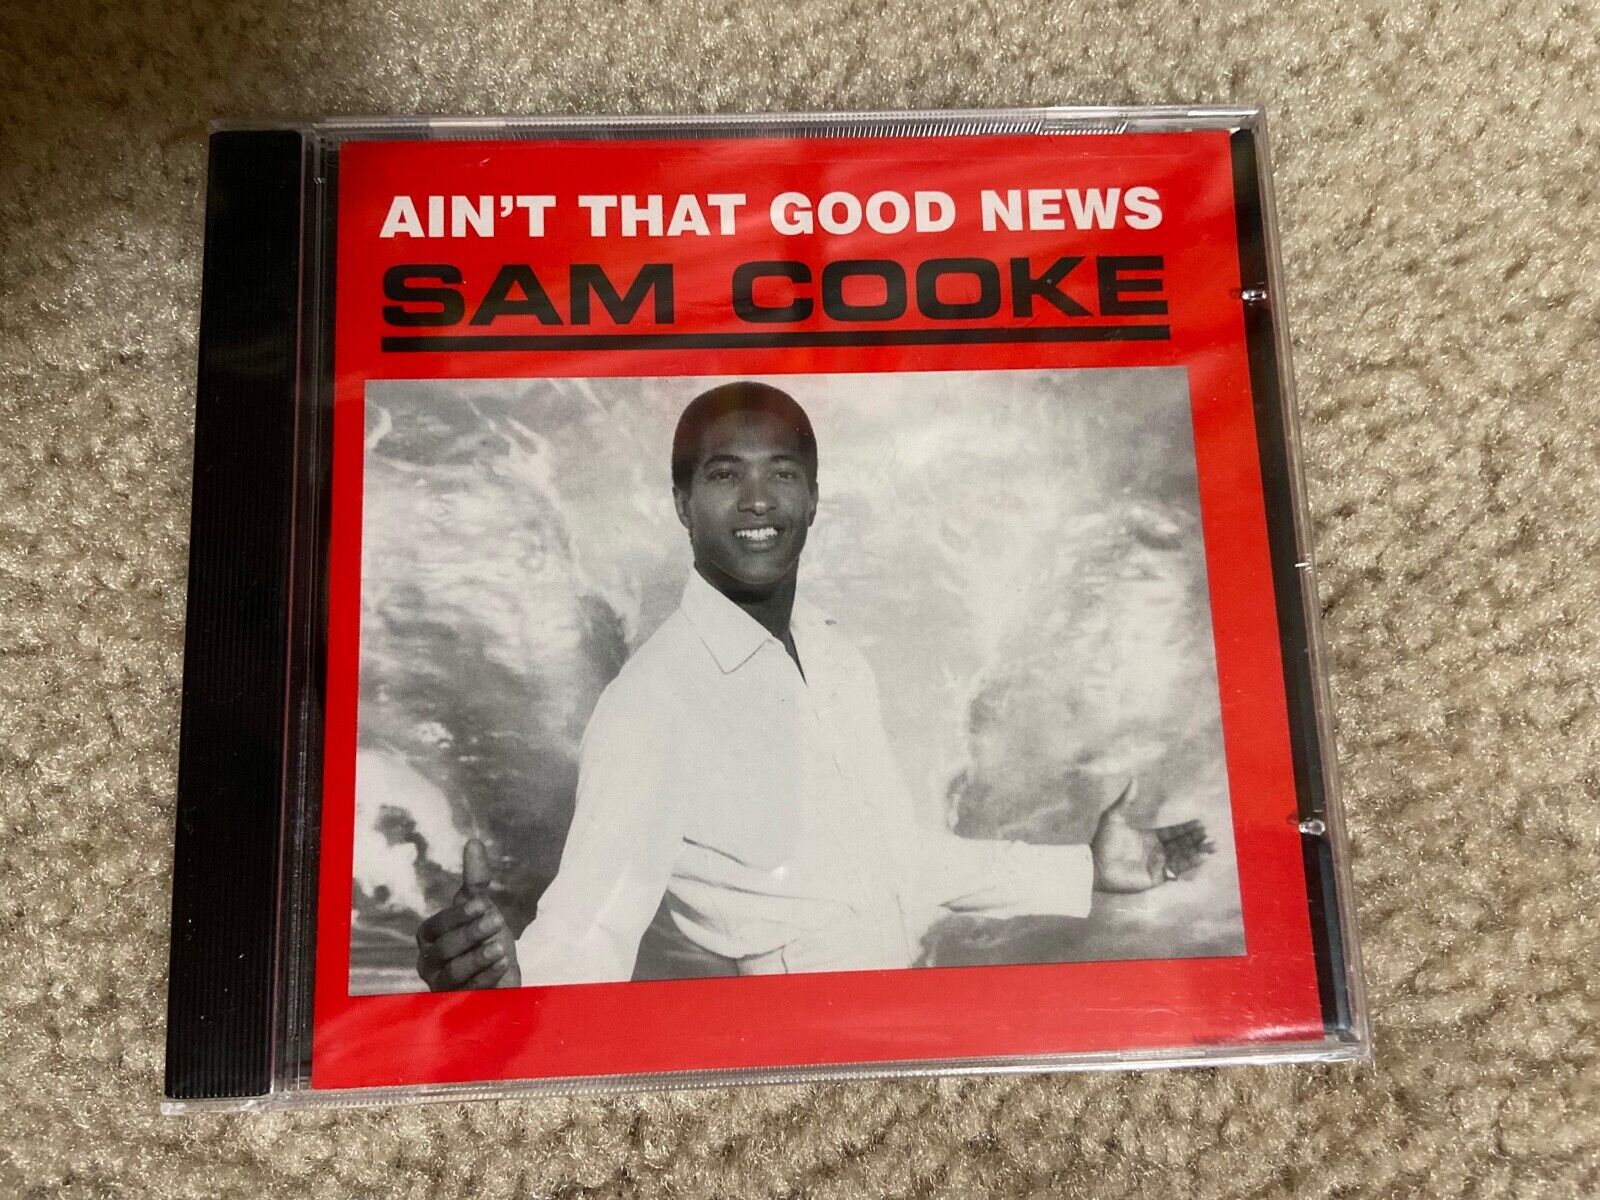 NEW! (CD) Ain't That Good News by Sam Cooke (CD, Jun-2003, ABKCO Records) cook